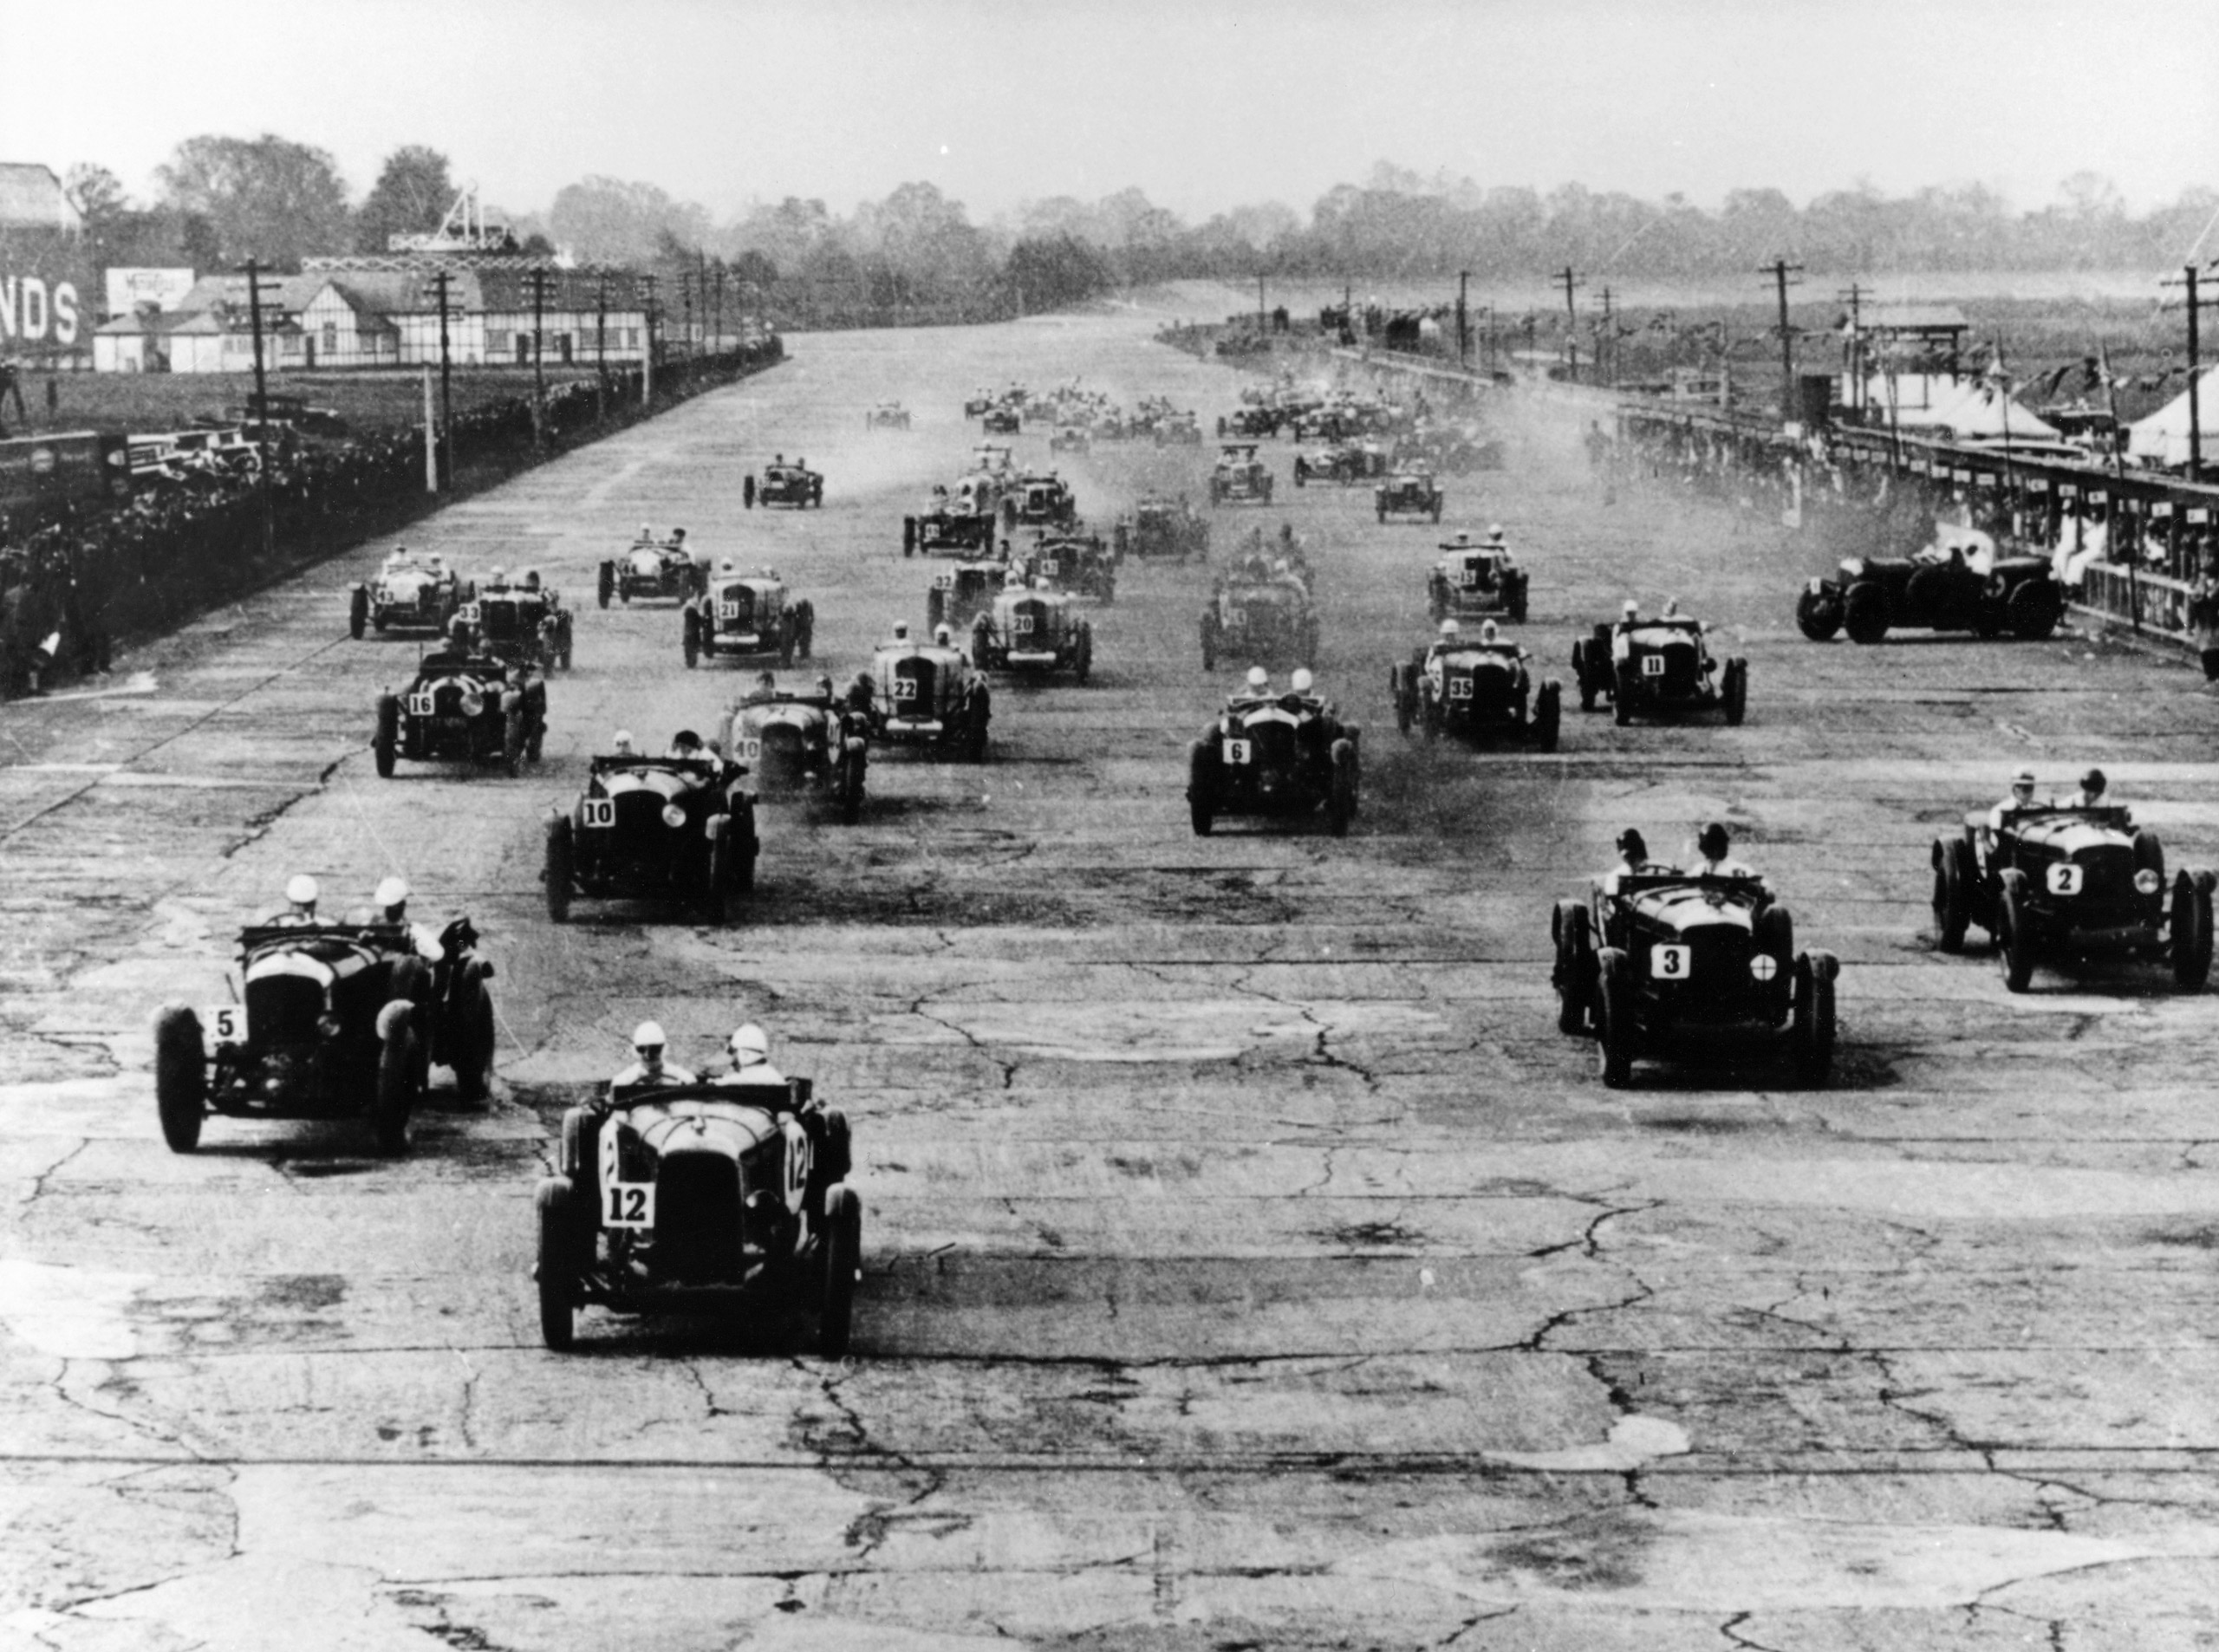 Motor race, Brooklands, Surrey, 1920s. A large field closely bunched together. On the right, one of the competitors appears to have spun.